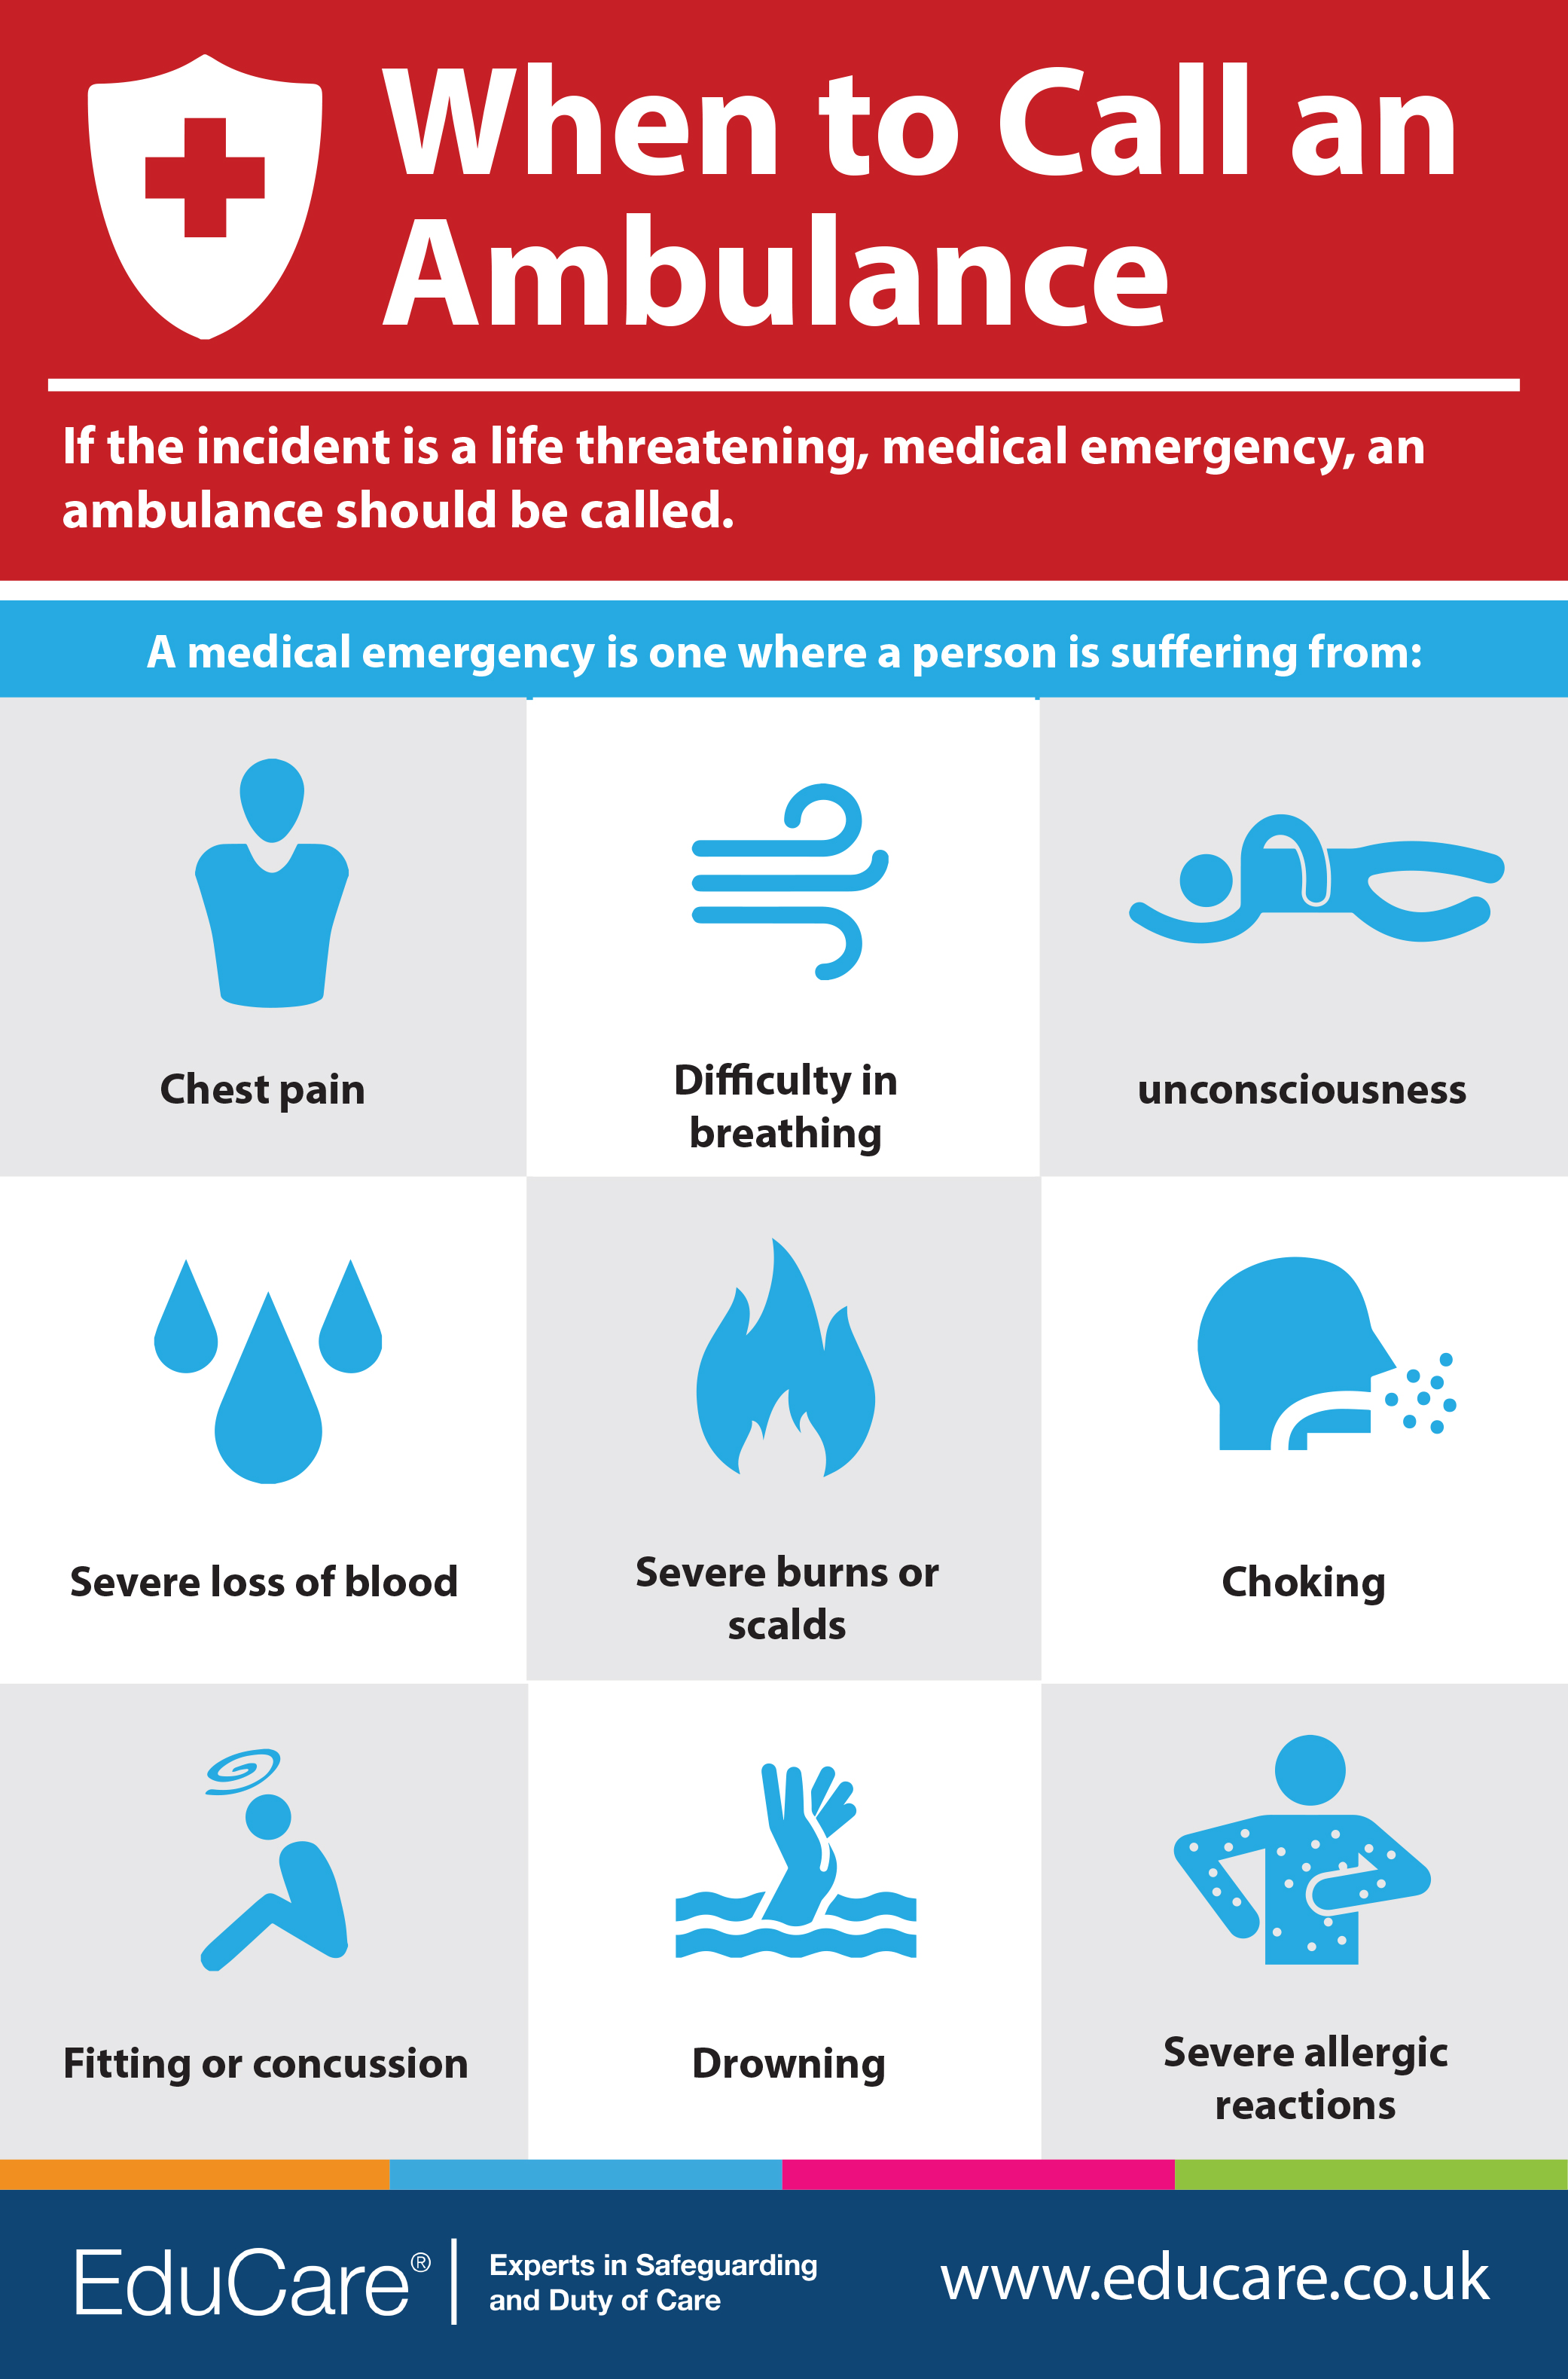 When to call an Ambulance infographic